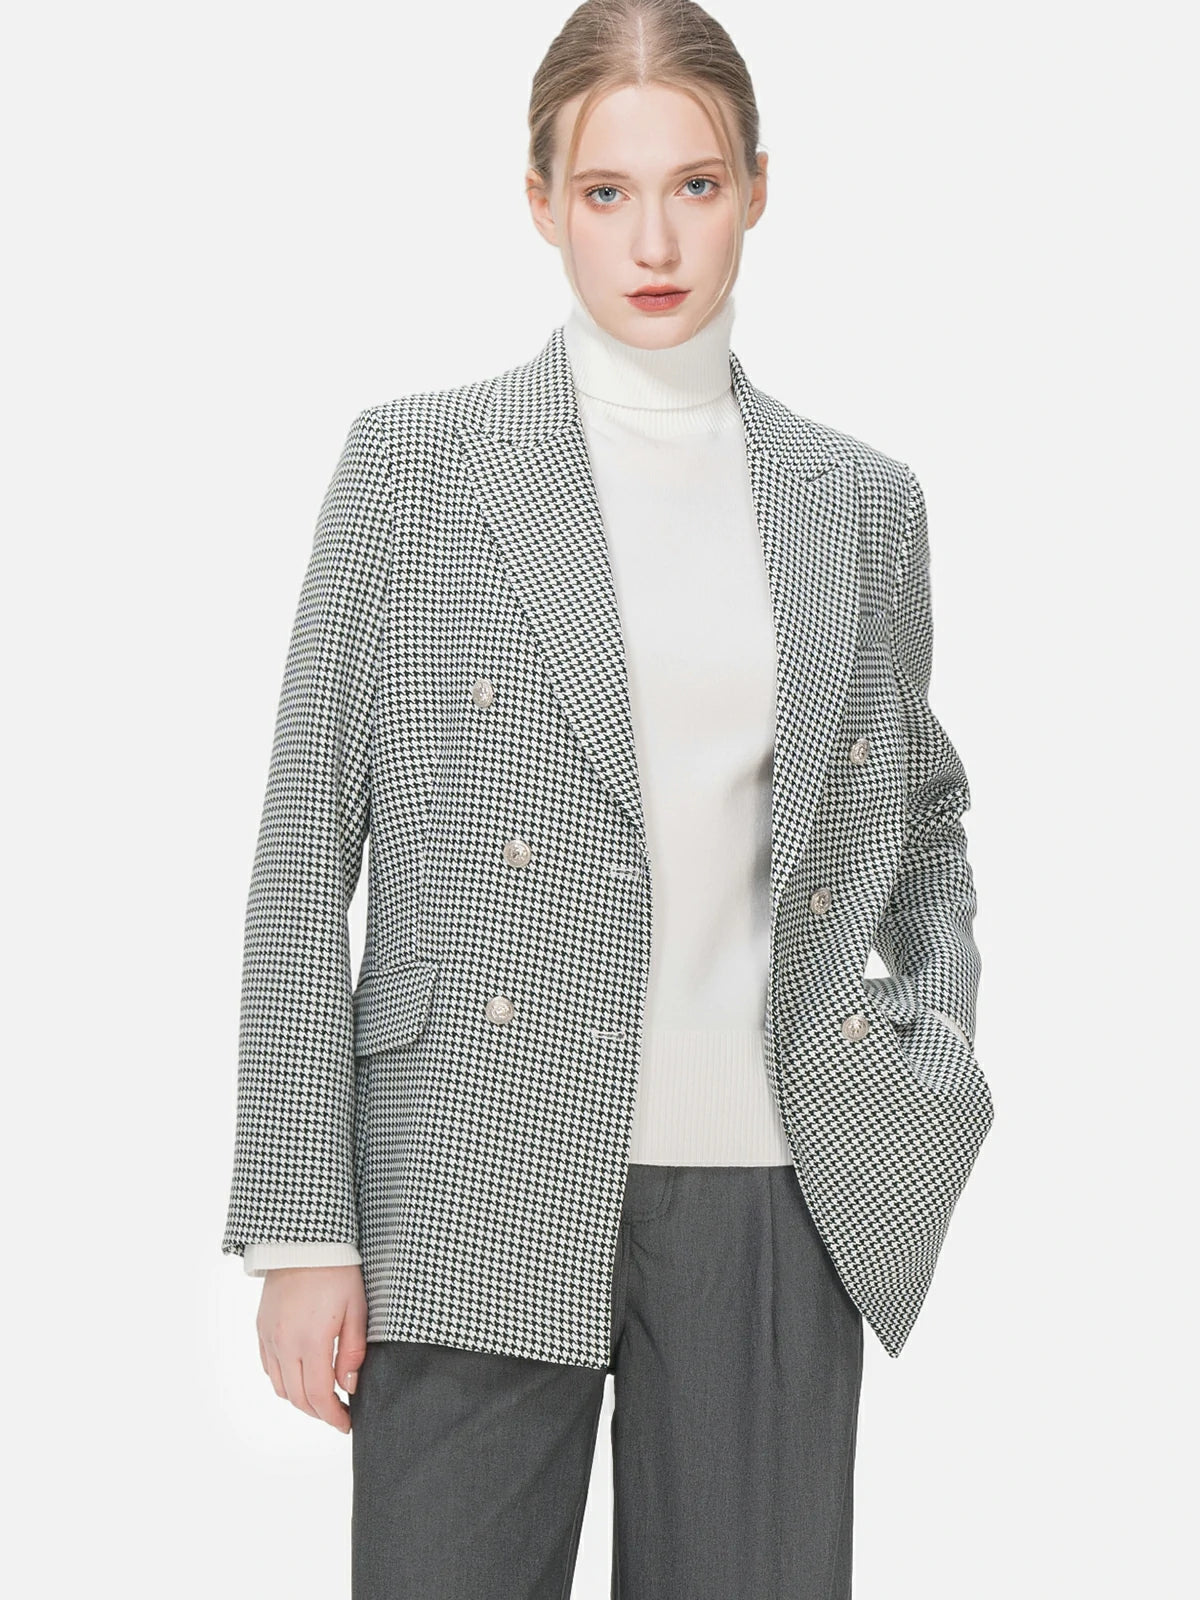 Explore the elegance of this houndstooth blazer in green tones, characterized by a refined design and vibrant color, creating a versatile and stylish outerwear option suitable for various occasions.